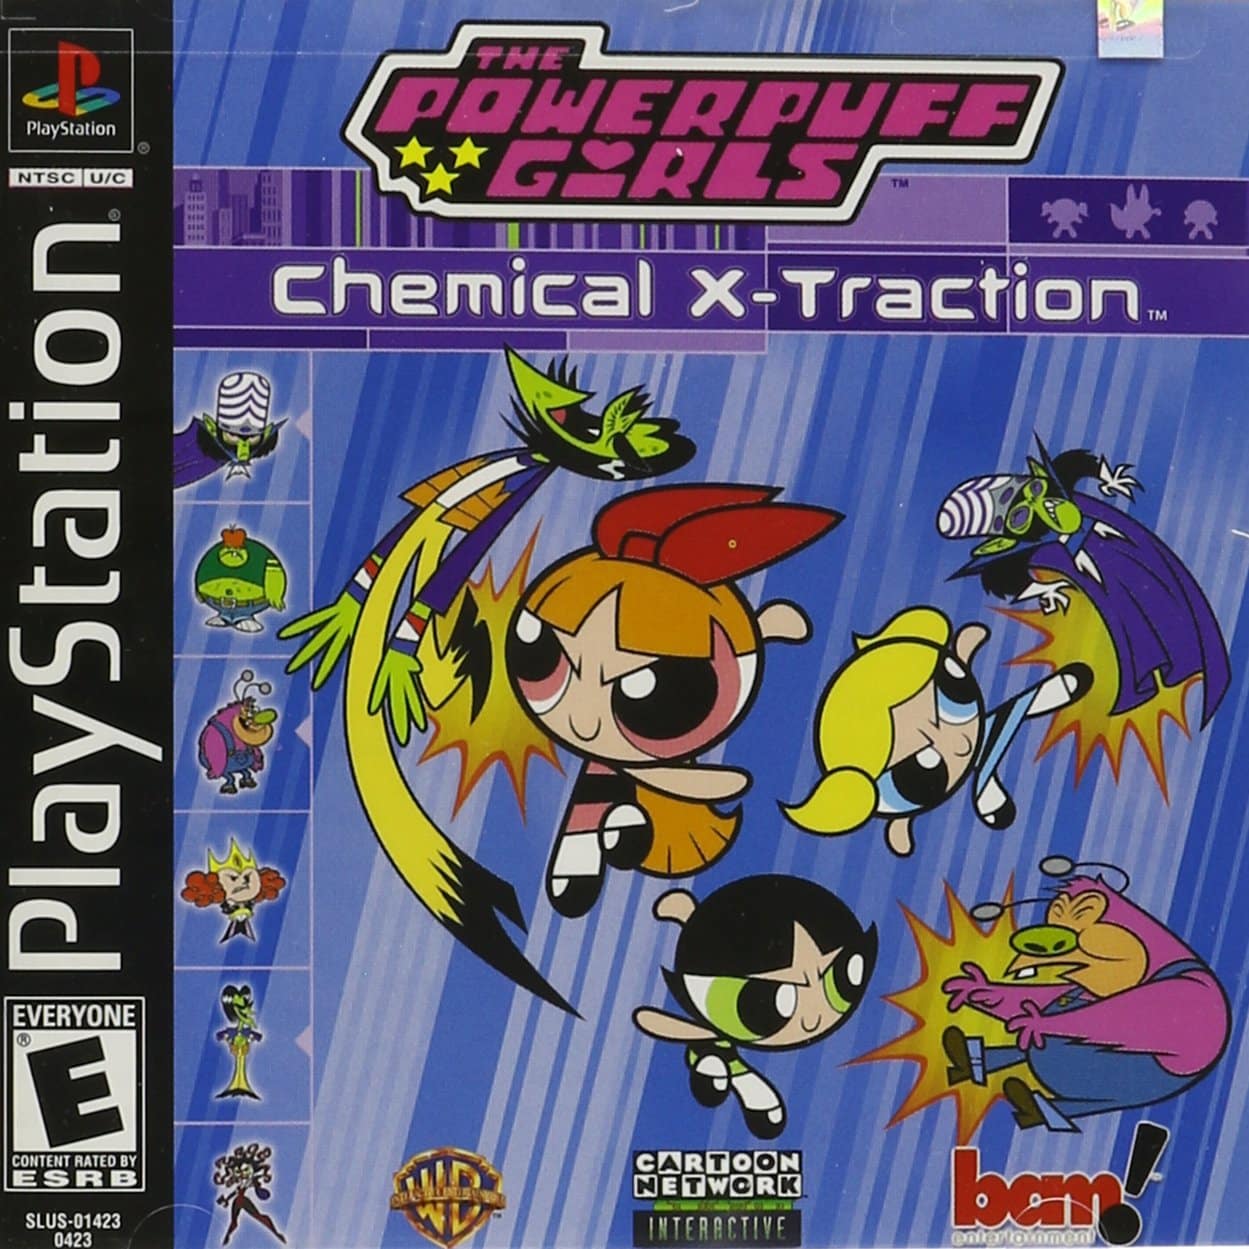 The Powerpuff Girls: Chemical X-traction player count stats